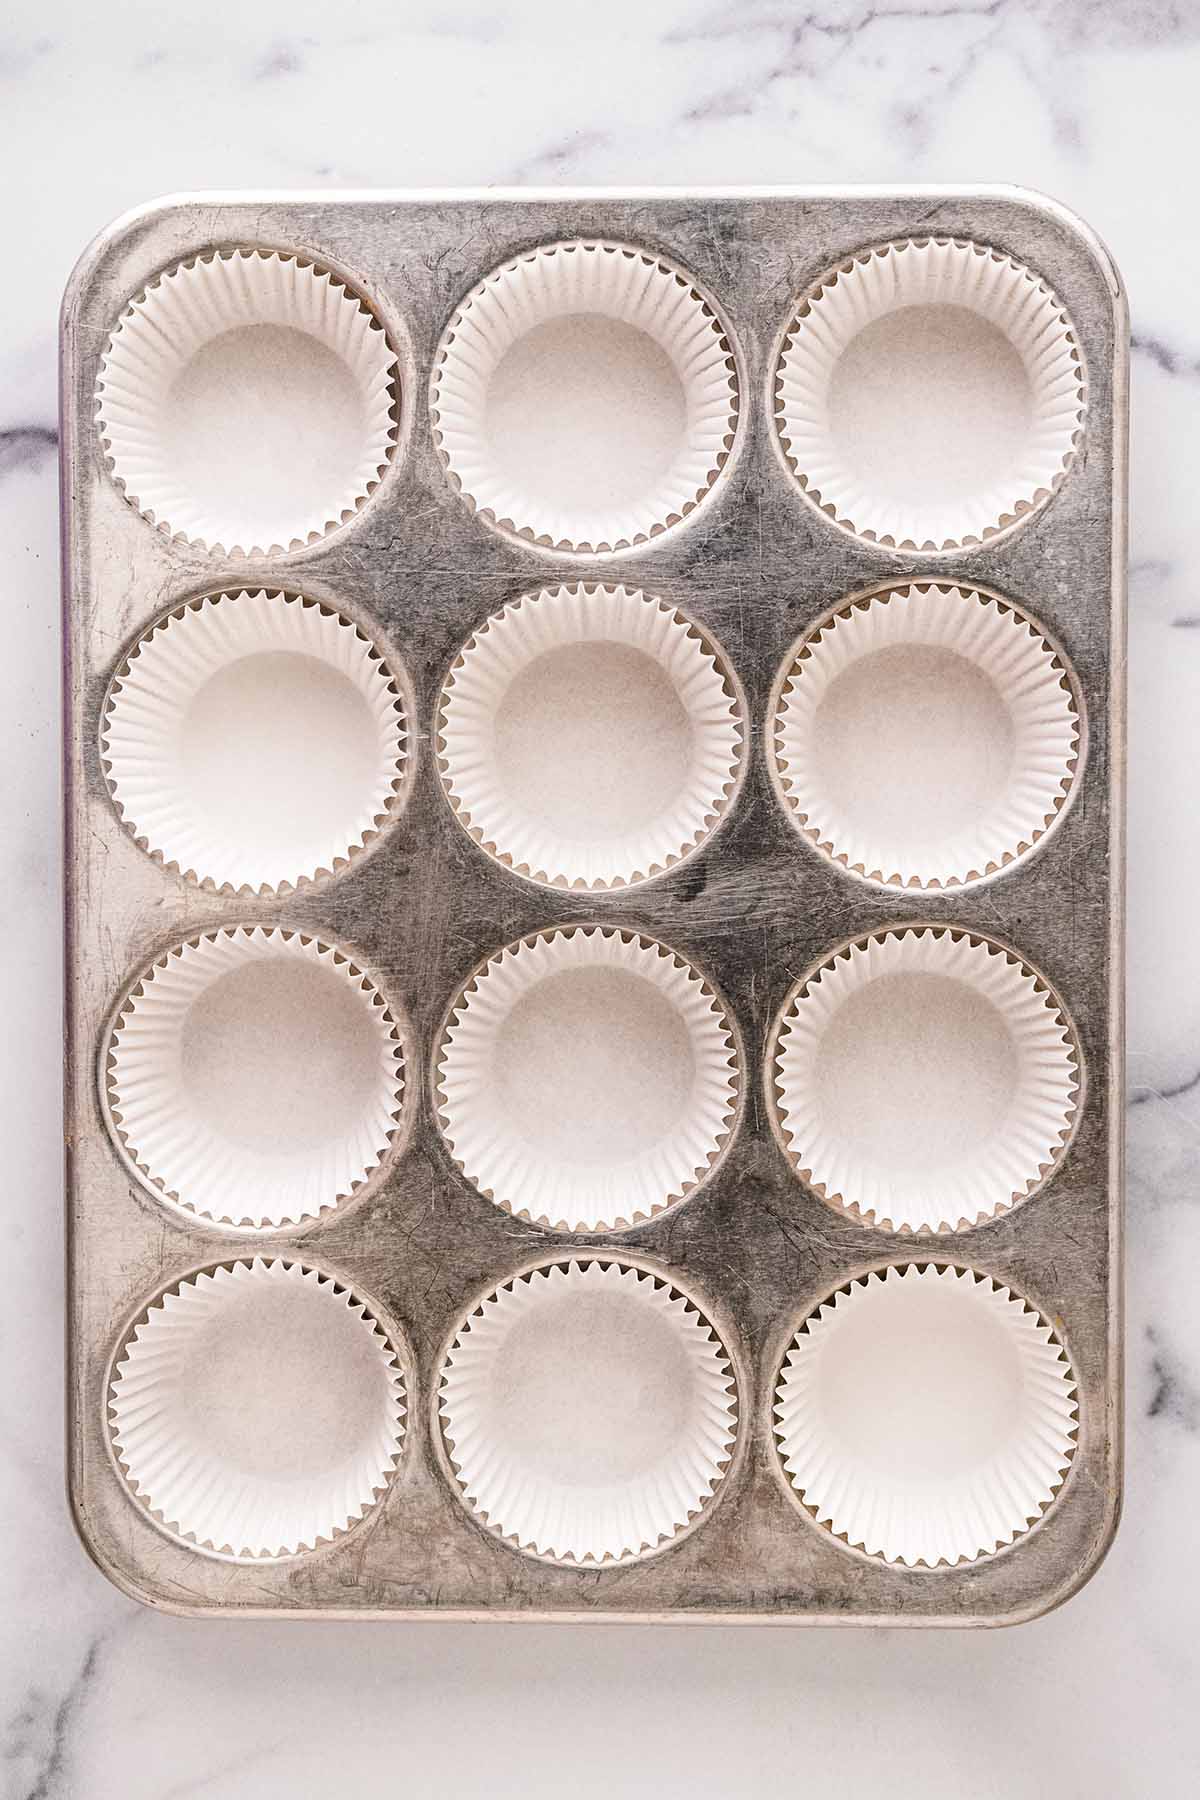 Muffin pan lined with paper liners.